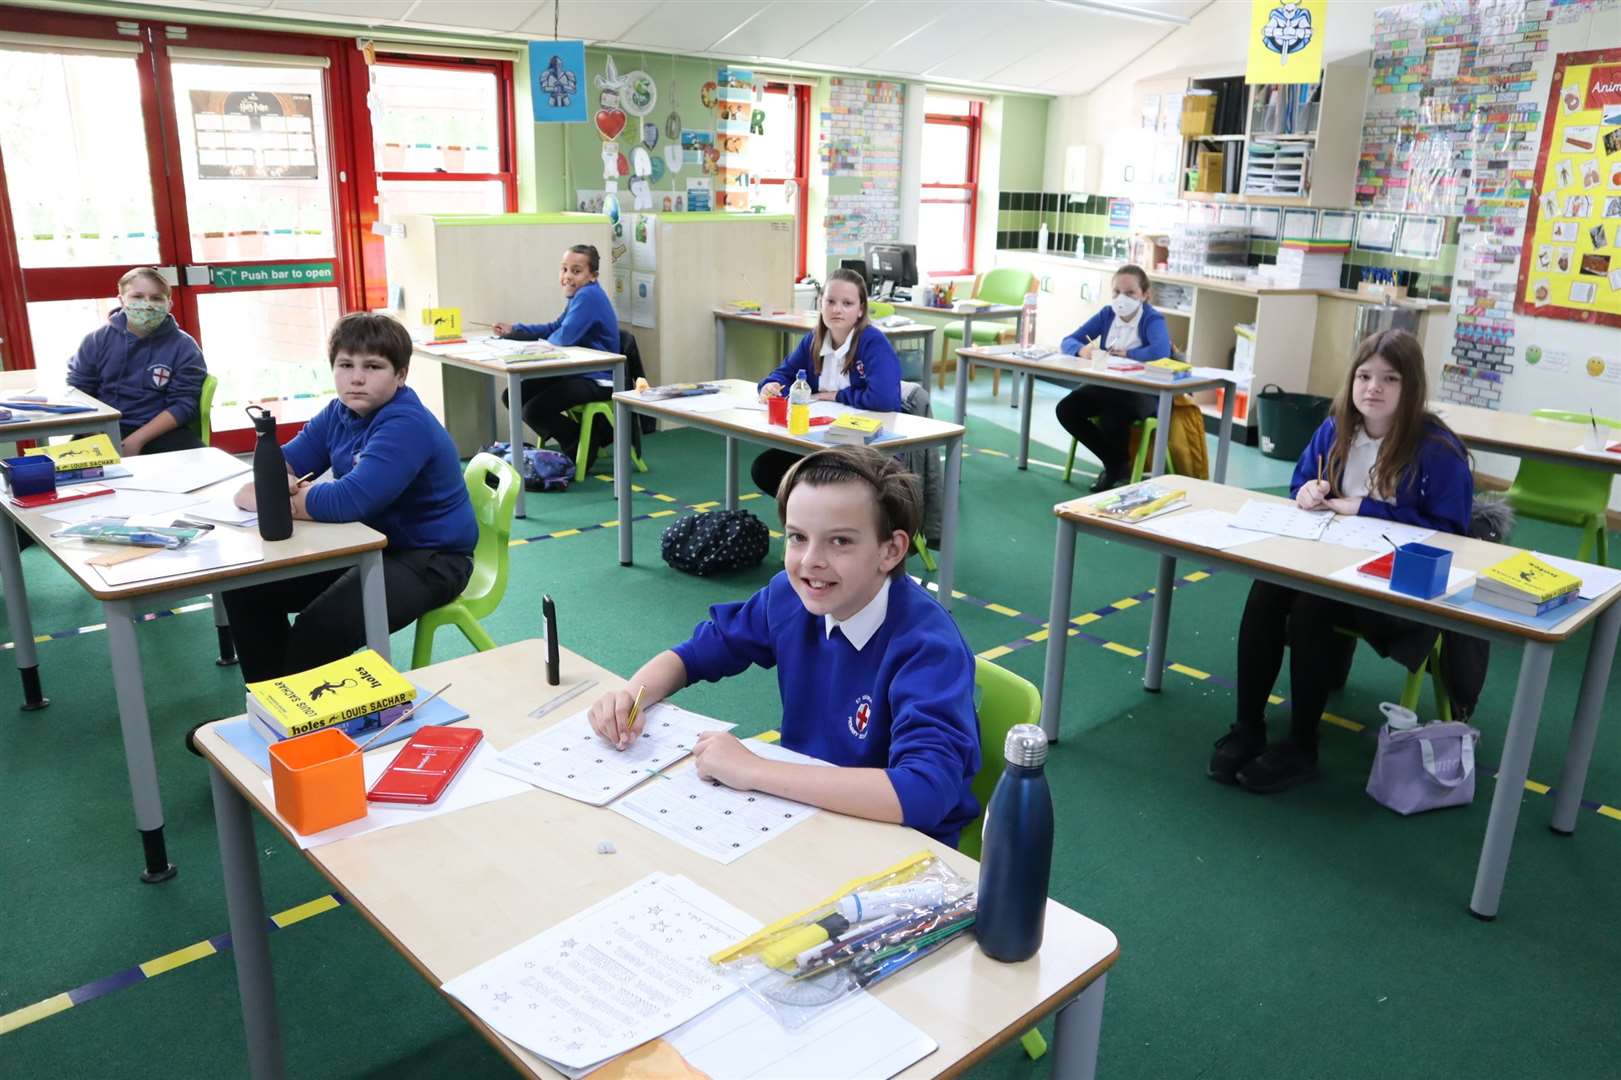 Year 6 settling down to lessons in their new-look classrooms at St George's CE Primary School in Minster, Sheppey